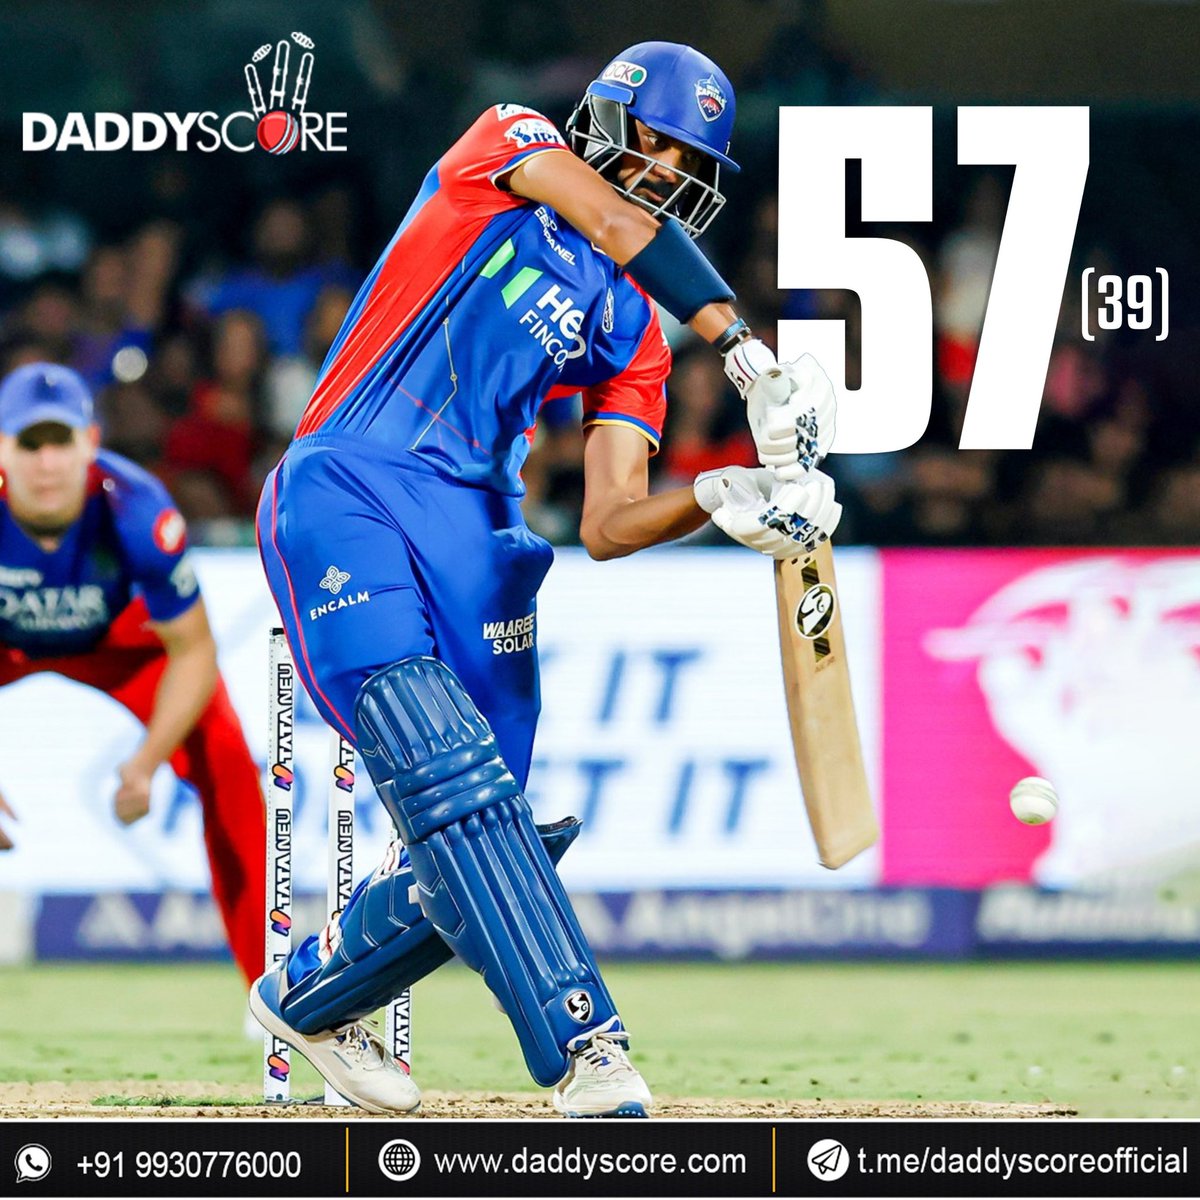 Well done Axar Patel scoring 57 runs in 39 balls in difficult conditions!